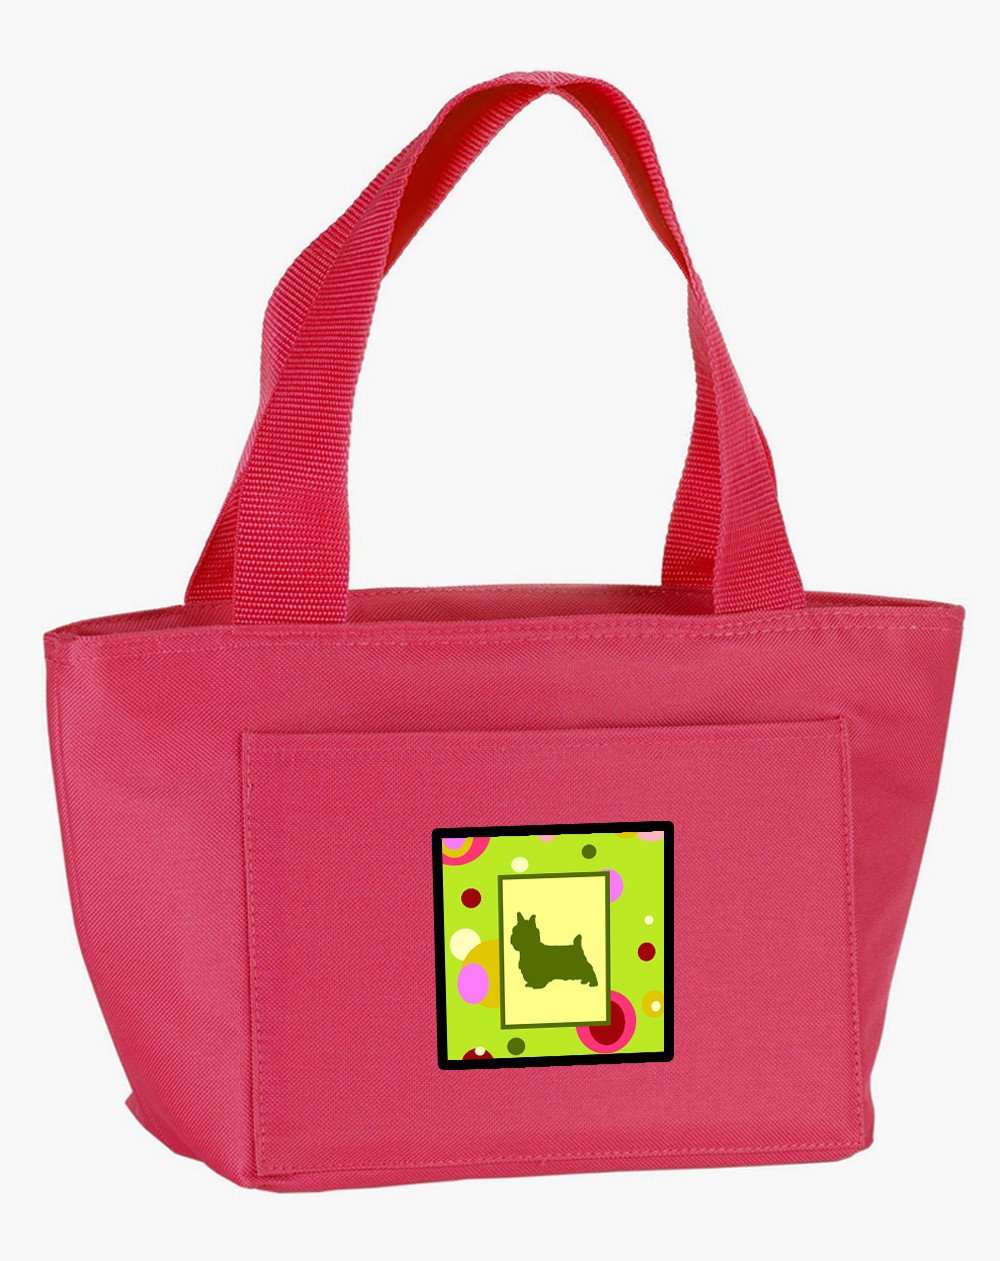 Lime Green Dots Norwich Terrier  Lunch Bag CK1056PK-8808 by Caroline's Treasures